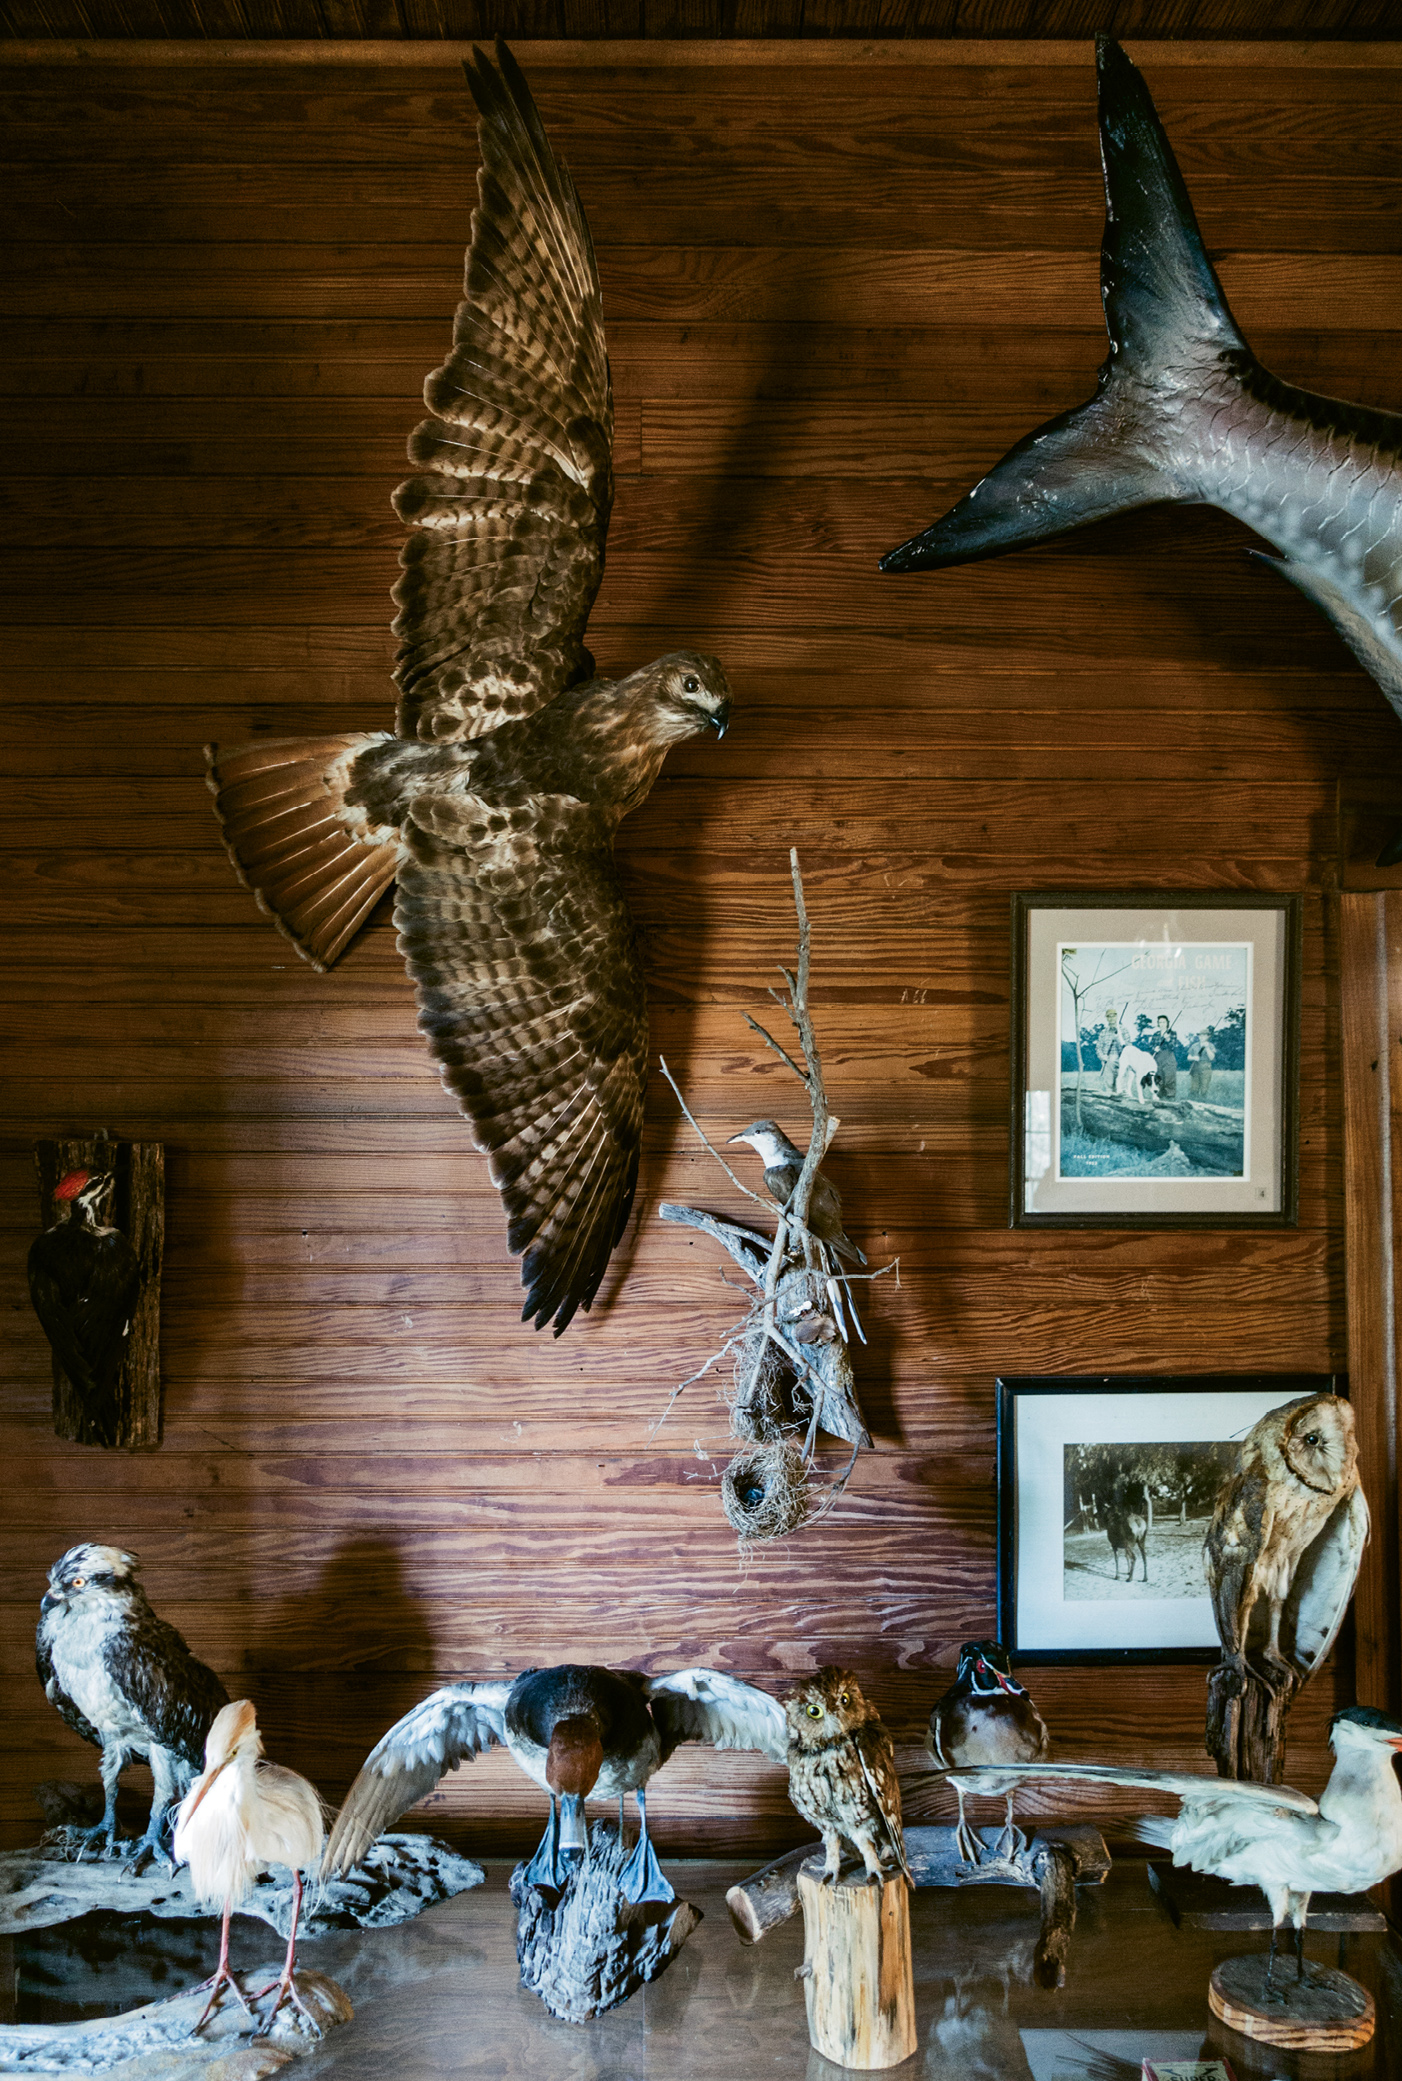 Wild in &amp; out: The lodge walls are lined with mementos from the island’s history and past guests, along with stuffed birds and other natural science treasures.